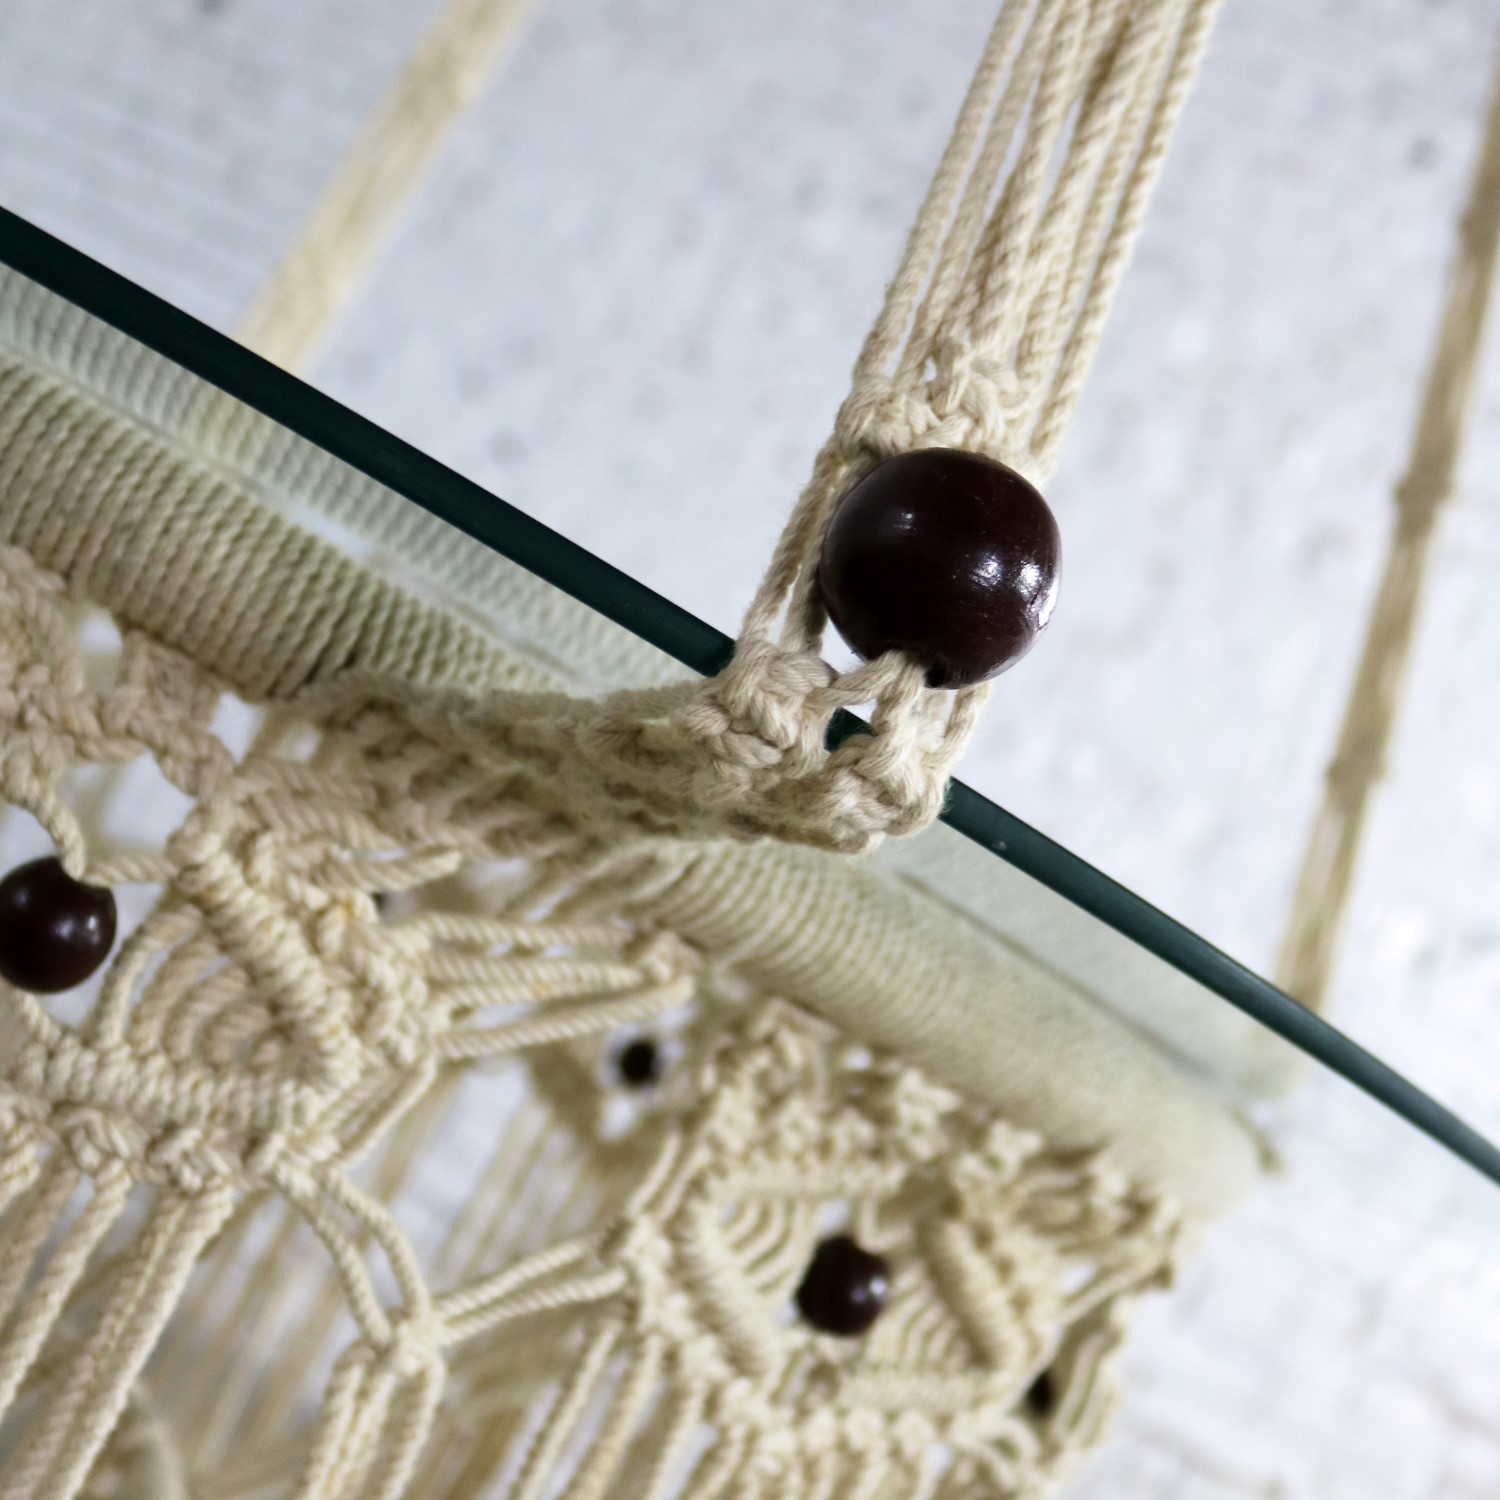 Vintage Bohemian White Macramé Hanging Table with Round Glass Top